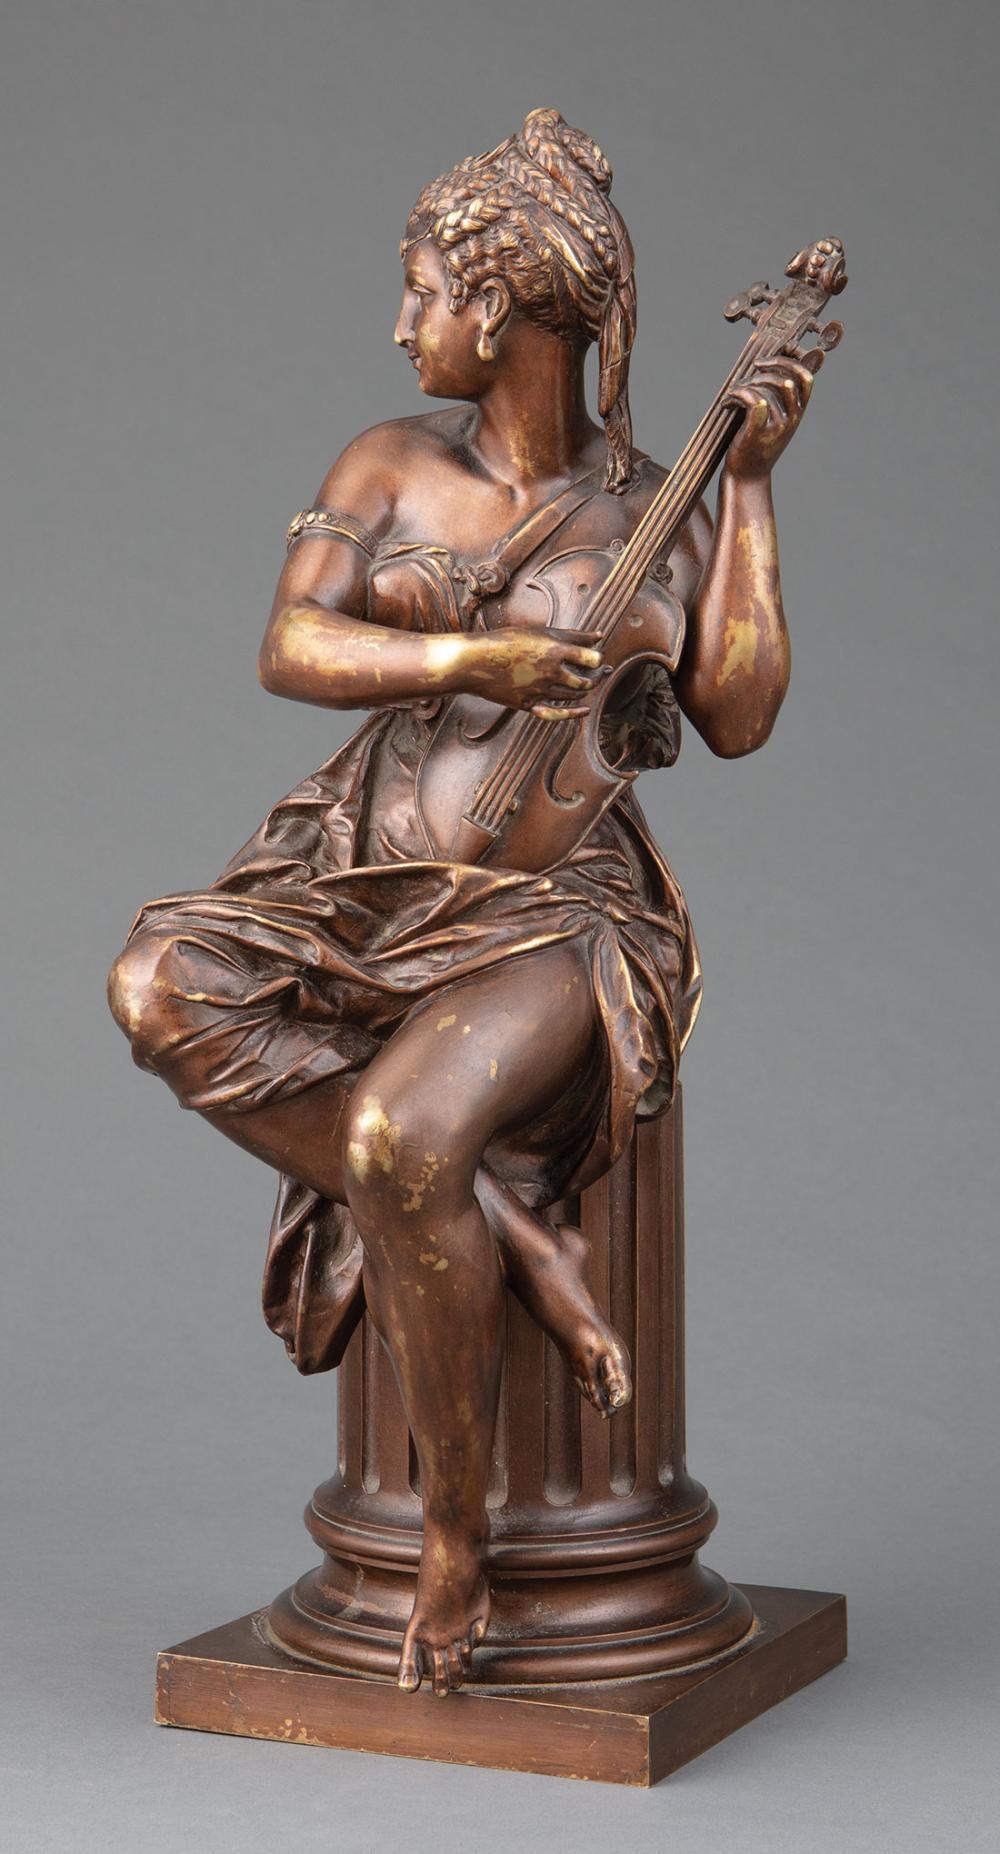 BRONZE FIGURE OF A WOMAN PLAYING 31b42a